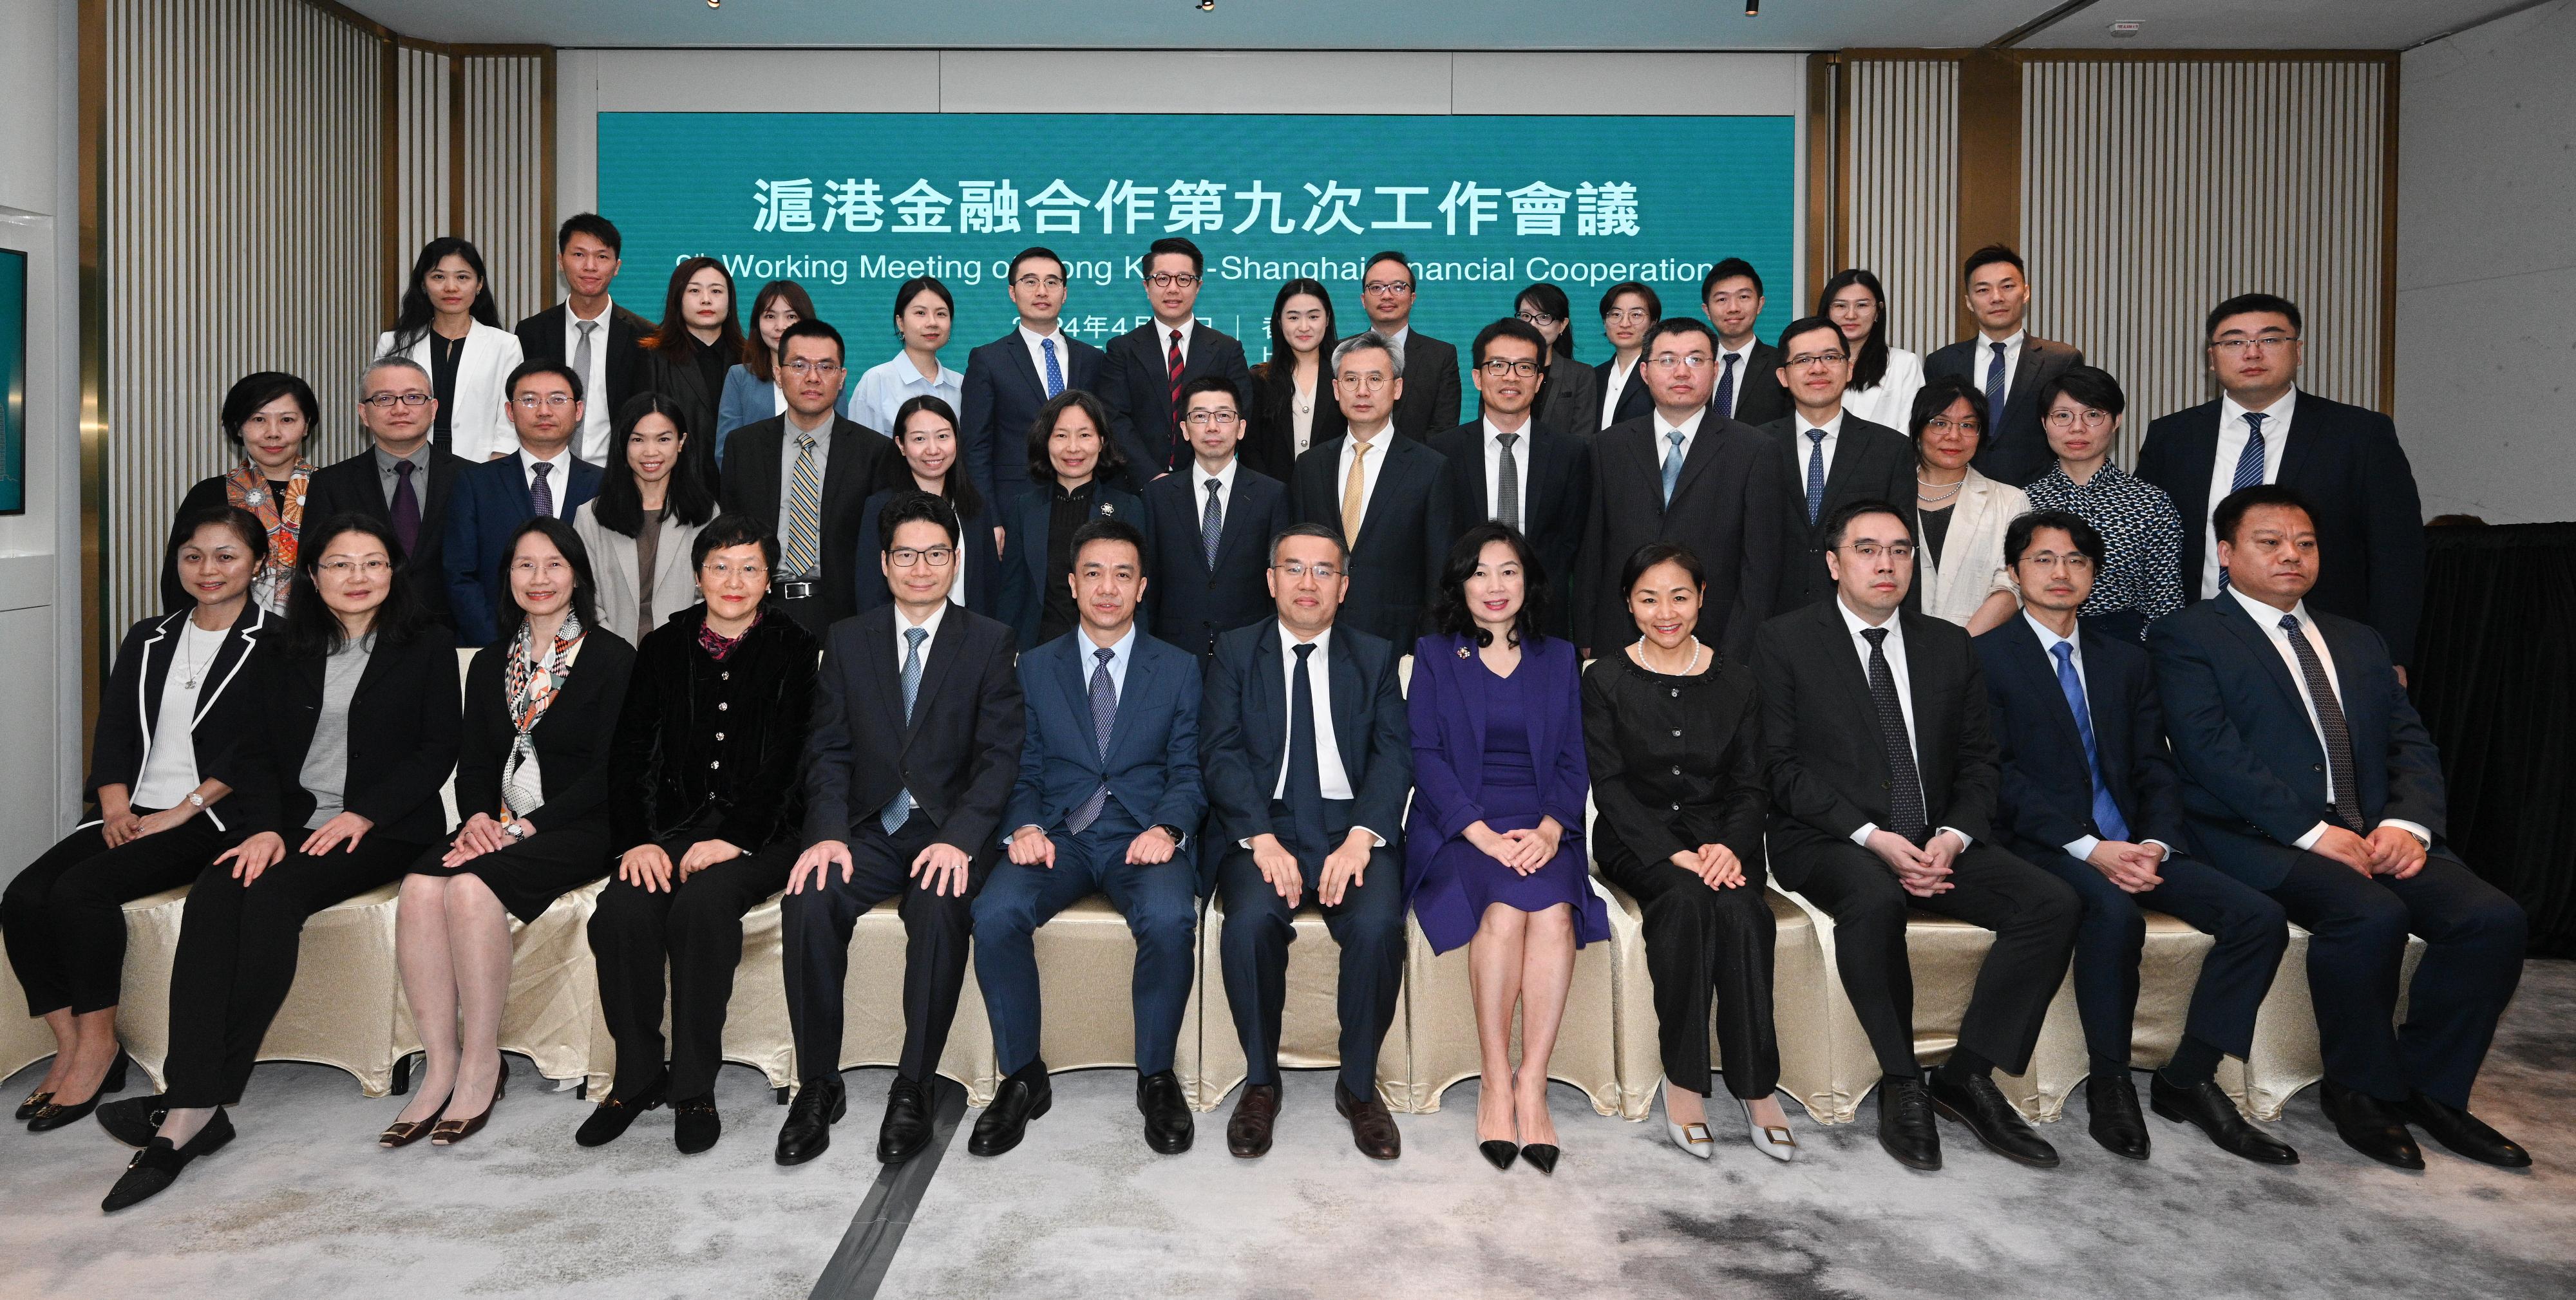 The Secretary for Financial Services and the Treasury, Mr Christopher Hui (front row, sixth right), and the Director-General of the Shanghai Office for Advancing International Financial Center Development, Mr Zhou Xiaoquan (front row, sixth left), held the ninth Working Meeting of Hong Kong-Shanghai Financial Co-operation in Hong Kong today (April 25). Representatives of government bodies, financial regulators and exchanges of the two places are pictured before the meeting. Hong Kong representatives included the Permanent Secretary for Financial Services and the Treasury (Financial Services), Ms Salina Yan (front row, fifth right), the Under Secretary for Financial Services and the Treasury, Mr Joseph Chan (front row, fifth left), and others from the Hong Kong Monetary Authority, the Securities and Futures Commission, the Insurance Authority and the Hong Kong Exchanges and Clearing Limited.